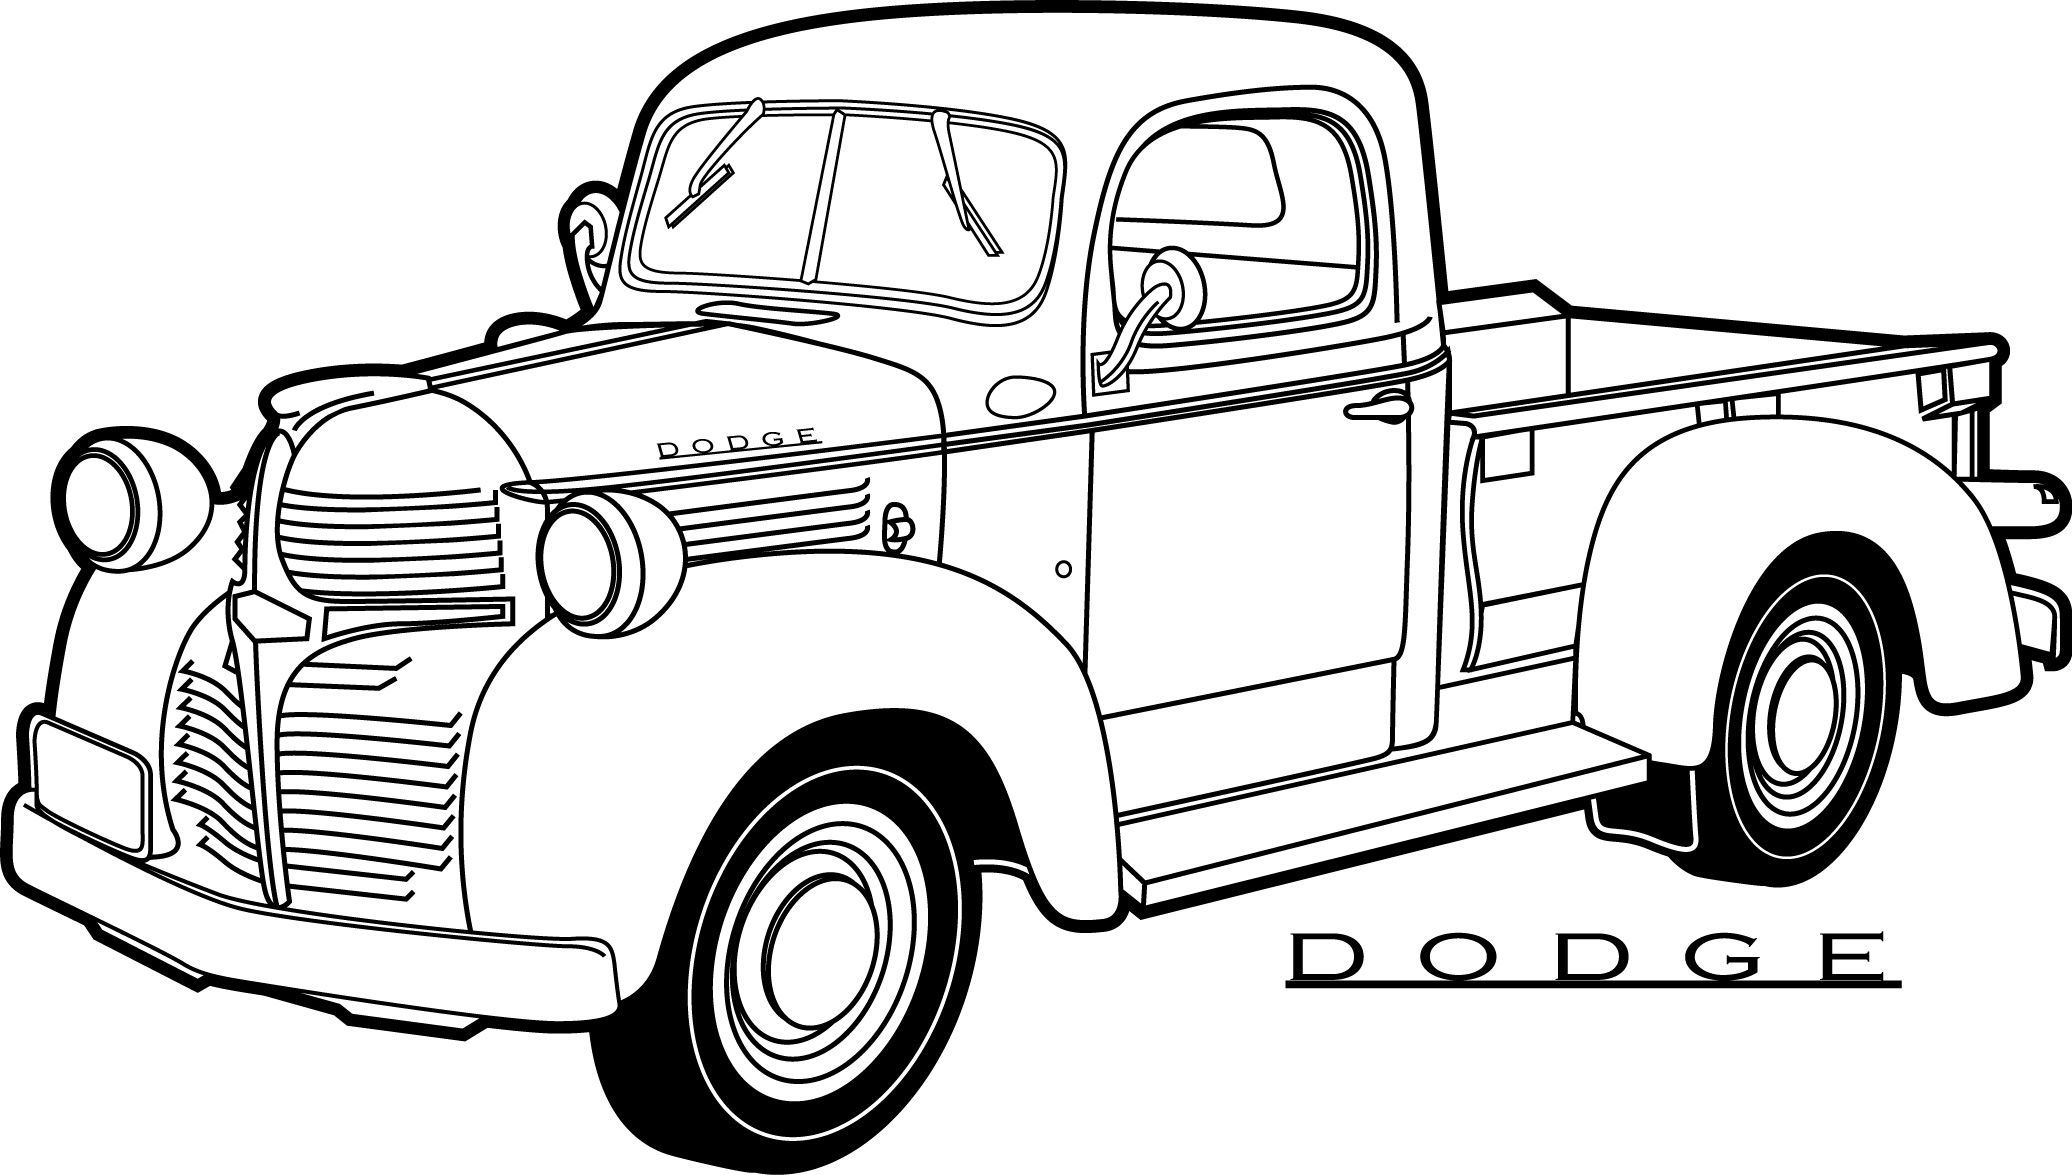 30 Coloring Pages Of Cars and Trucks | Truck coloring pages, Cars coloring  pages, Coloring pages